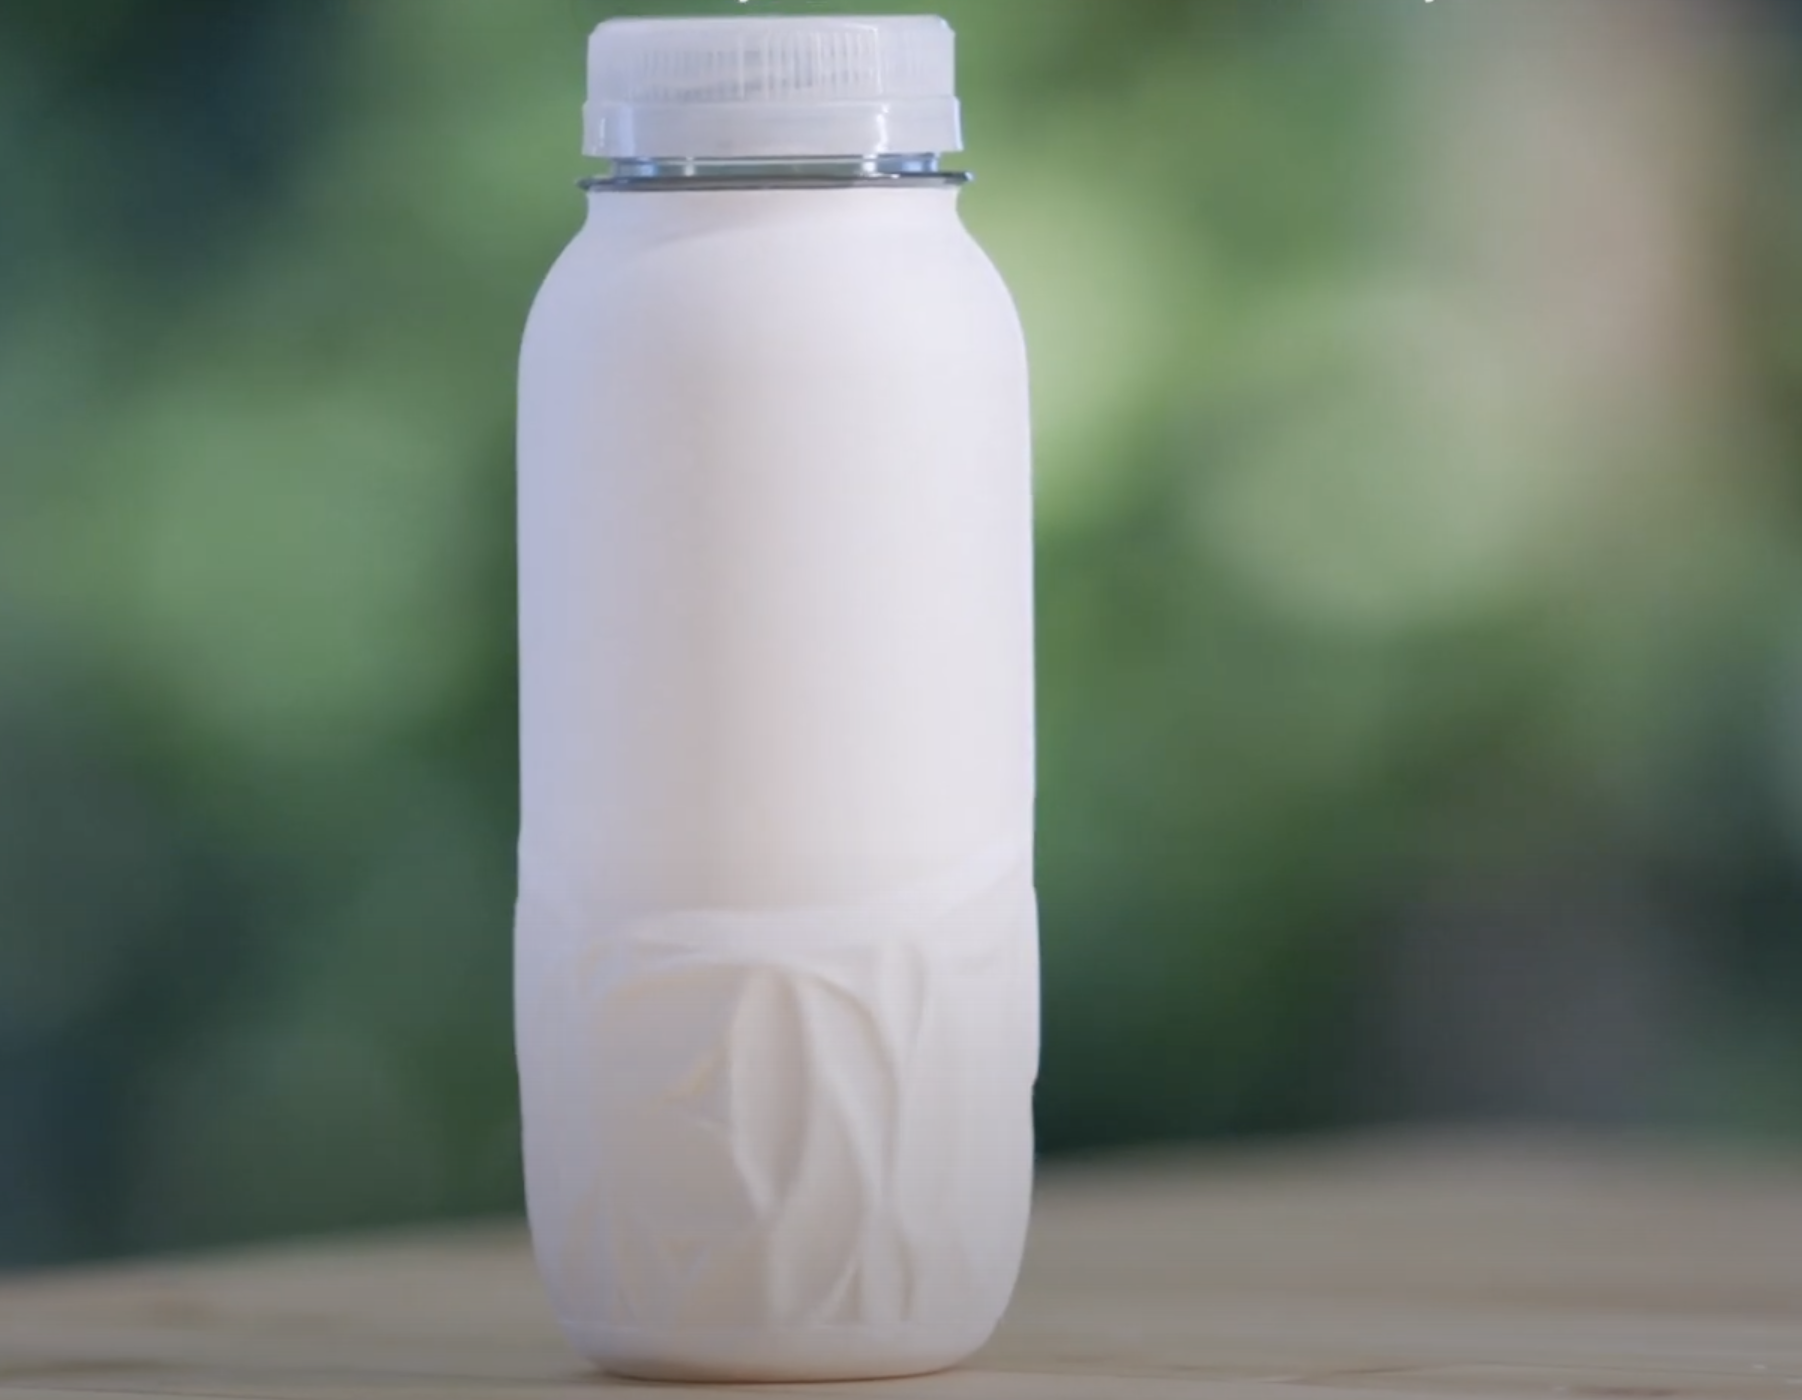 Coca-Cola introduces a bottle partly made of paper